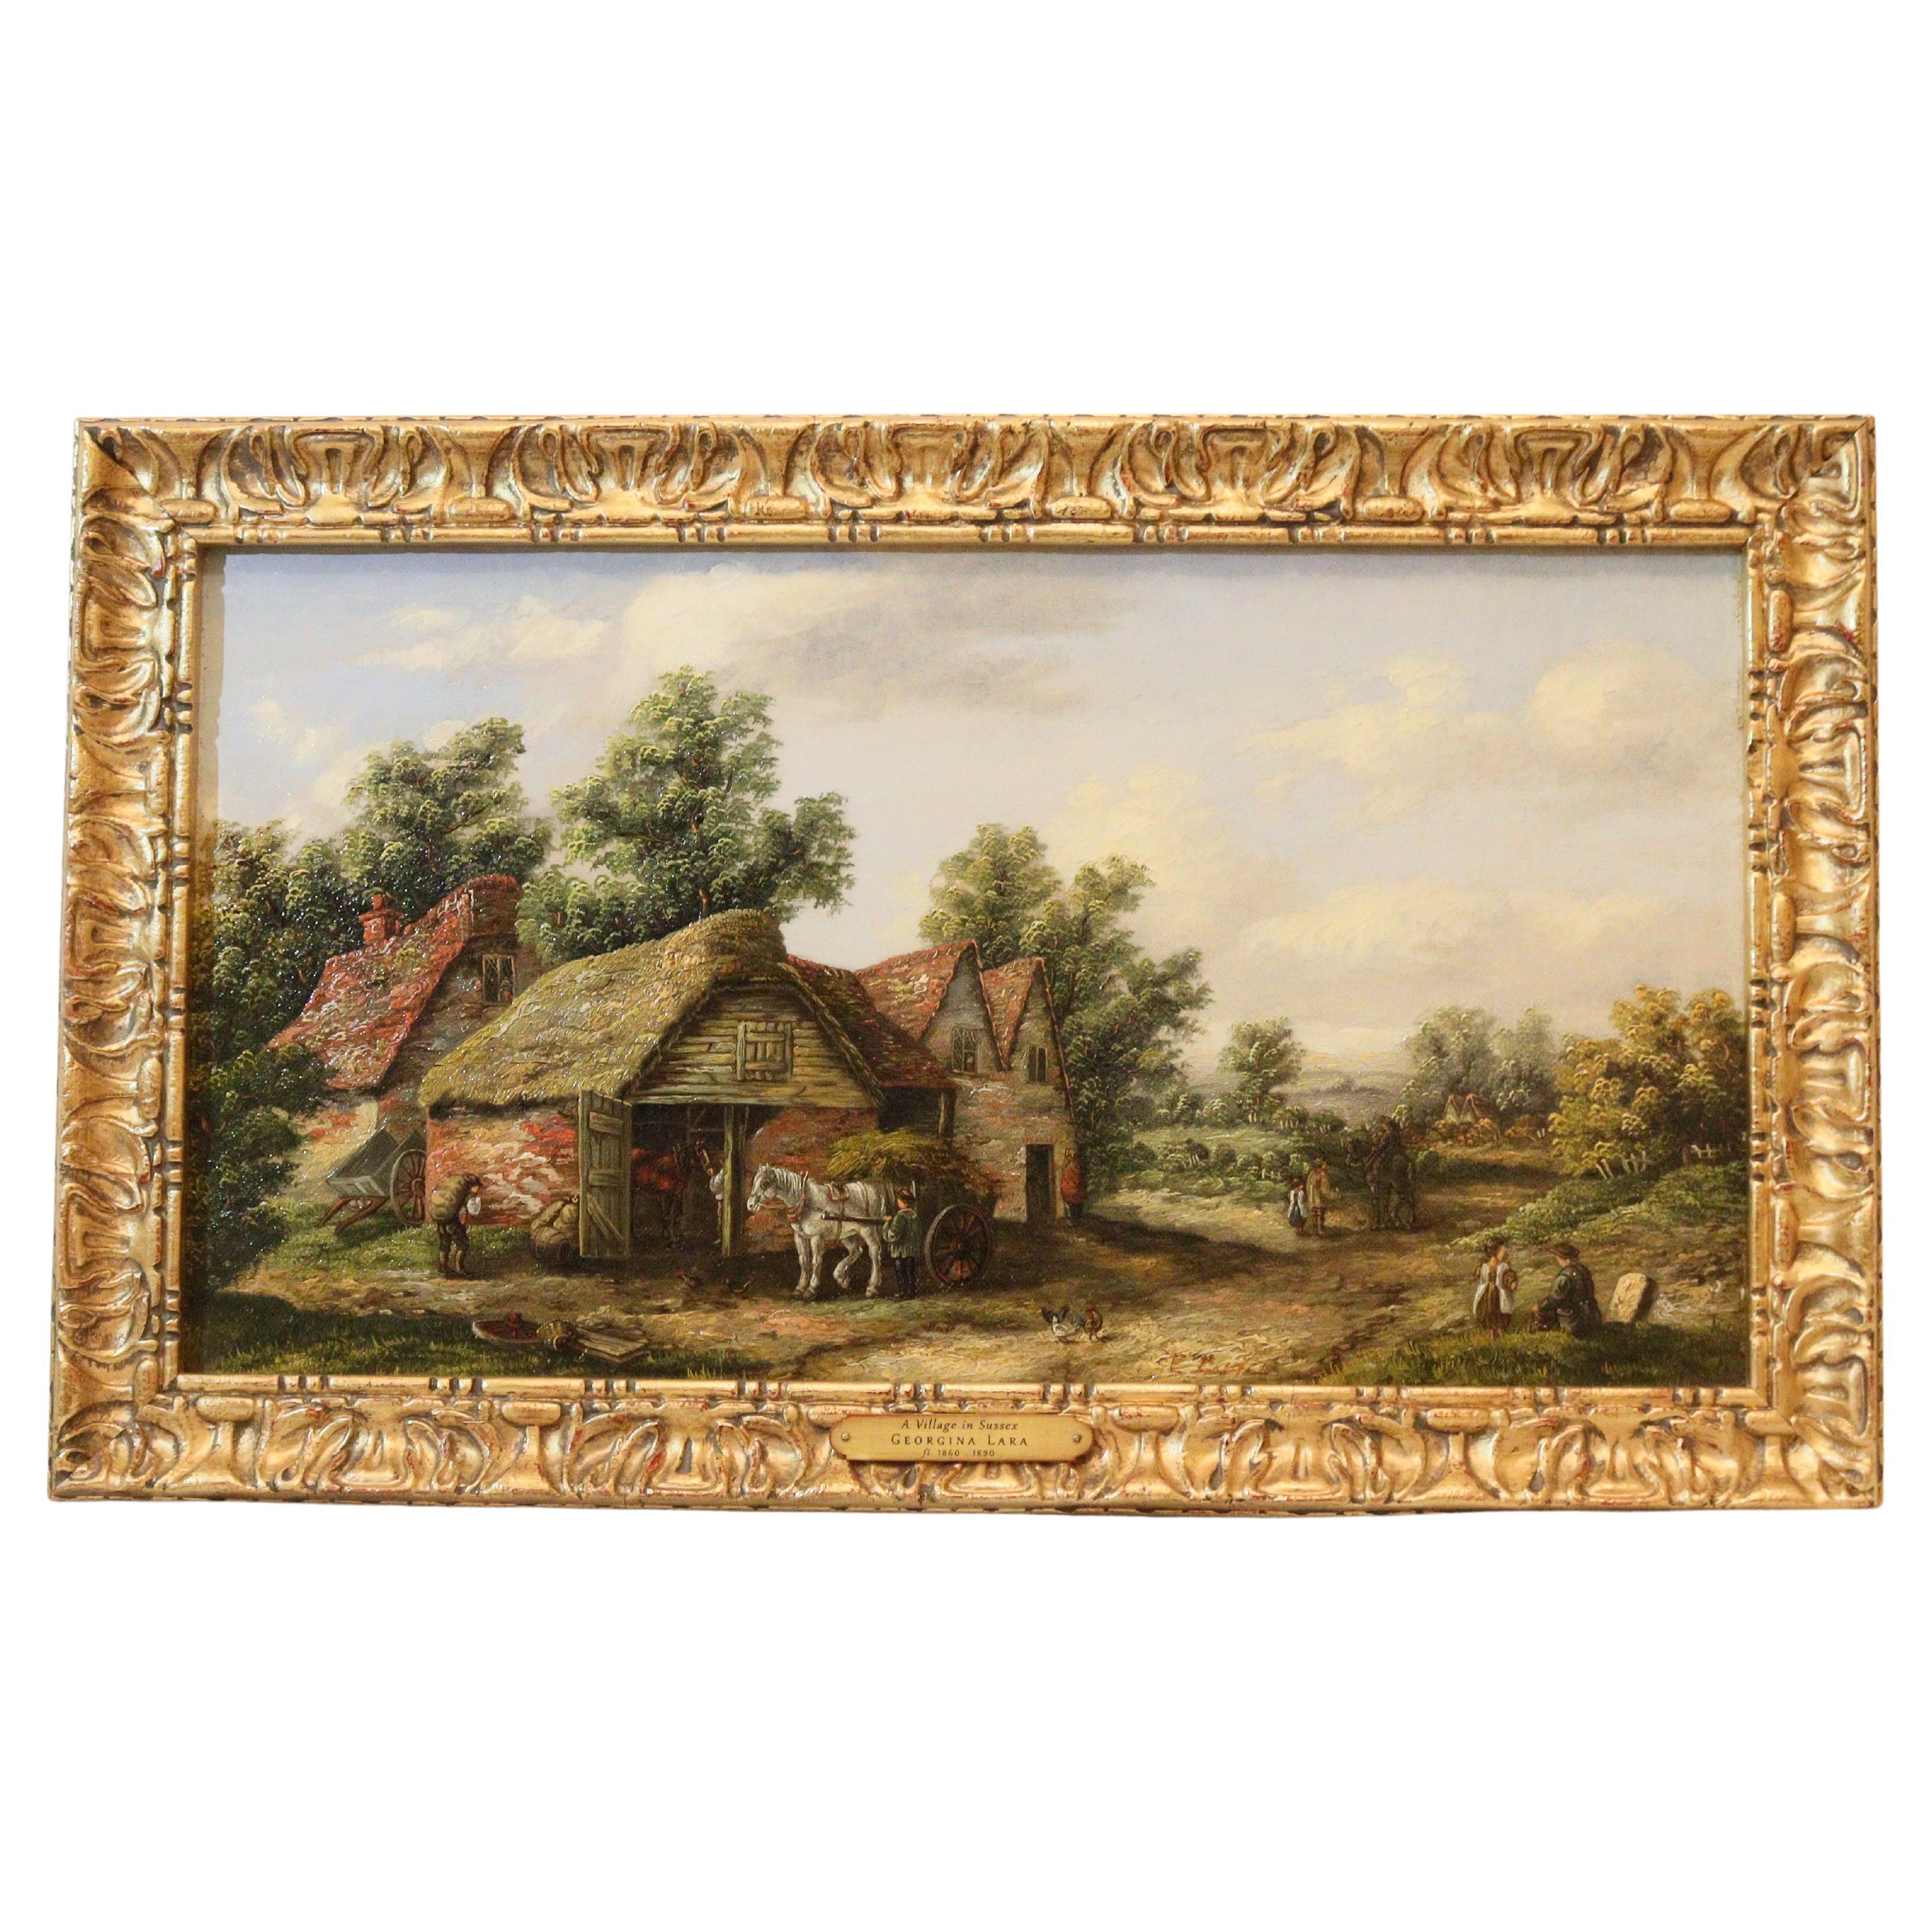 19th Century Oil Painting entitled "A Village in Sussex" by Georgina Lara